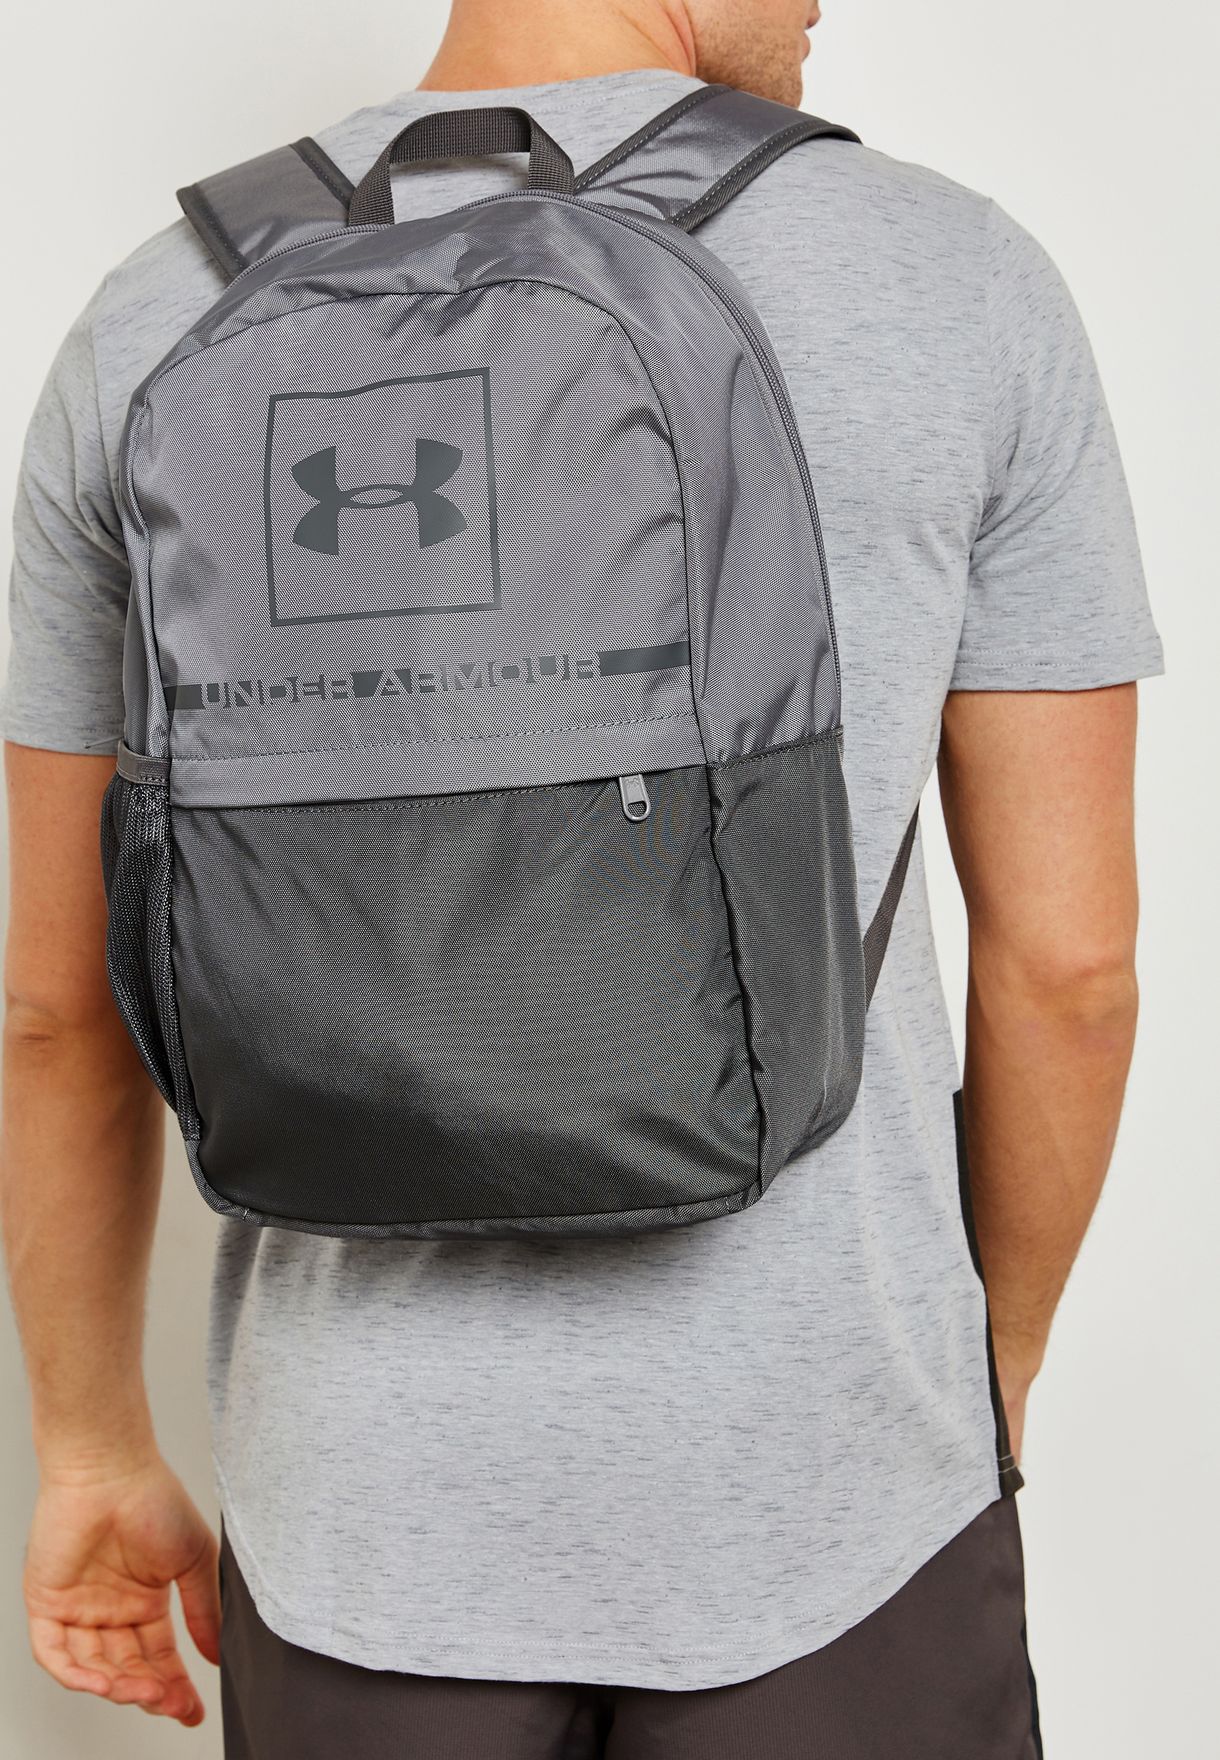 under armour project 5 backpack size